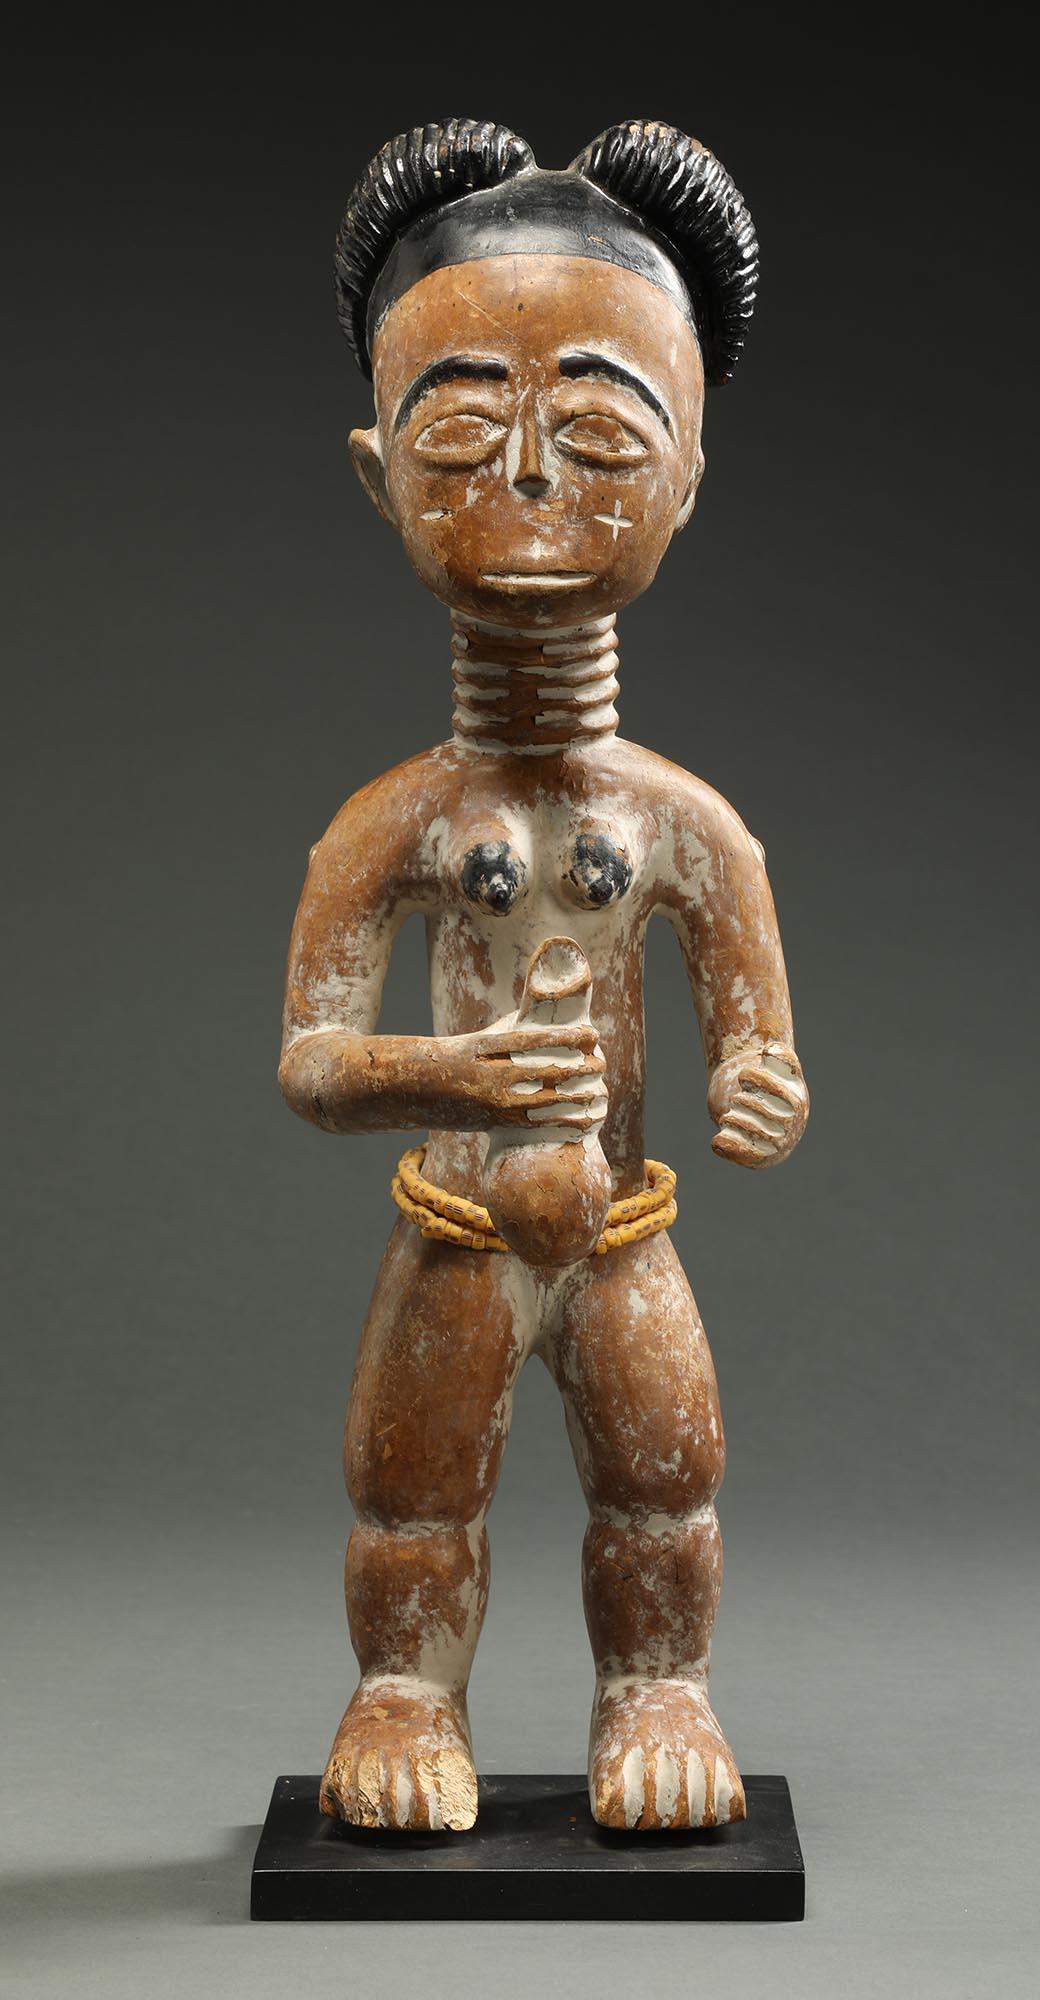 Akan, Ghana, shrine figure, a standing female figure with black hair and details, remains of white pigment, with arms out holding a bottle, includes custom metal base. Probably a figure representing an ancestor from a family shrine. Measure: 15 1/2